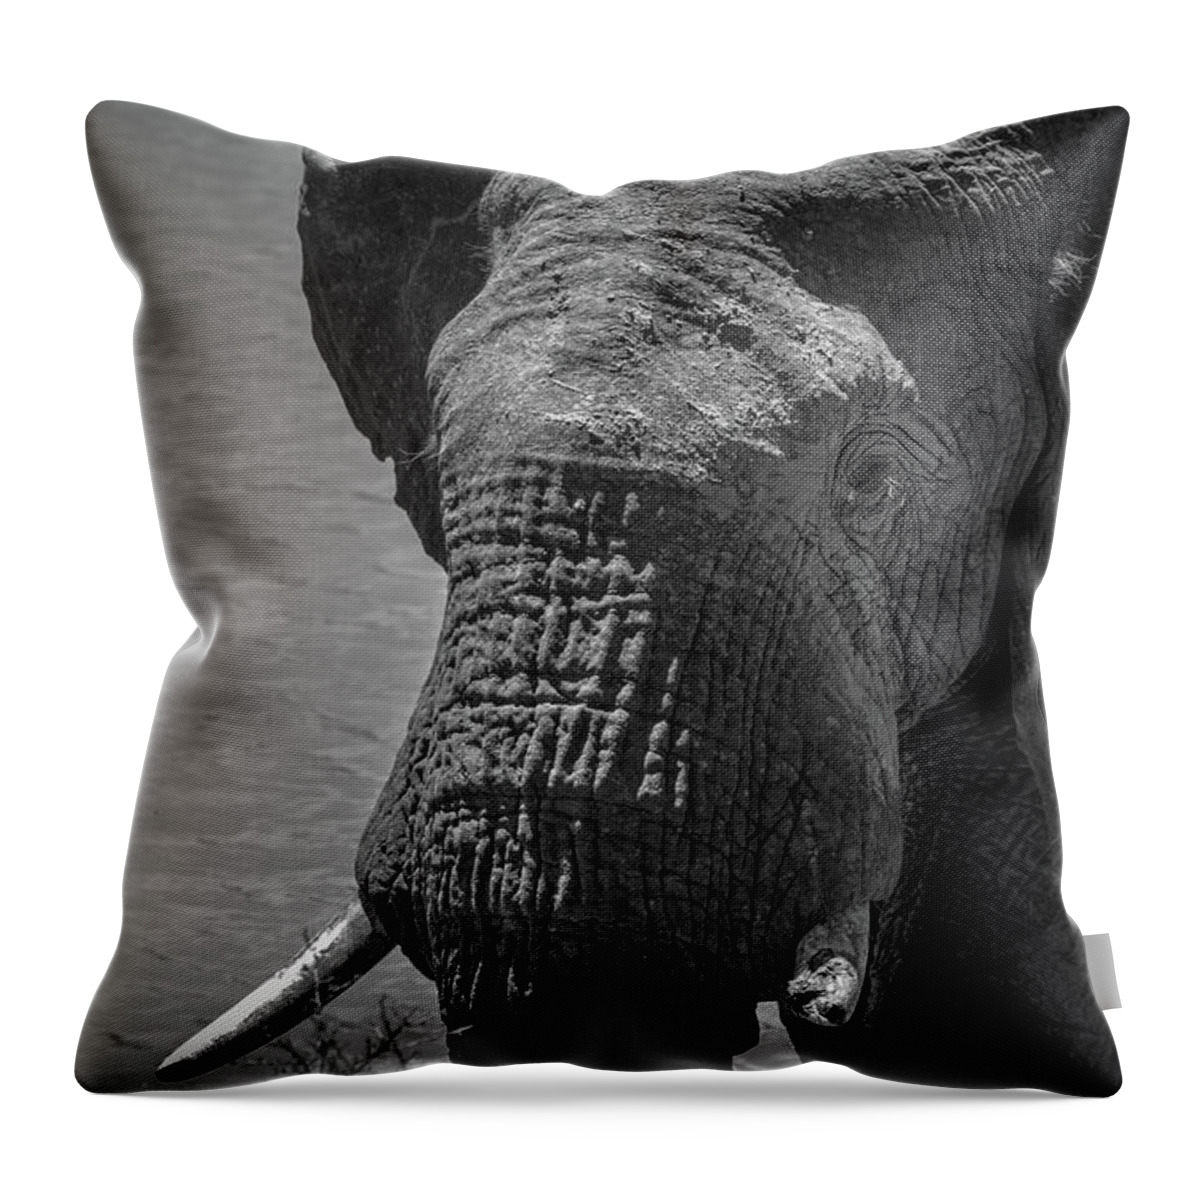 Africa Throw Pillow featuring the photograph The Guardian by James Capo